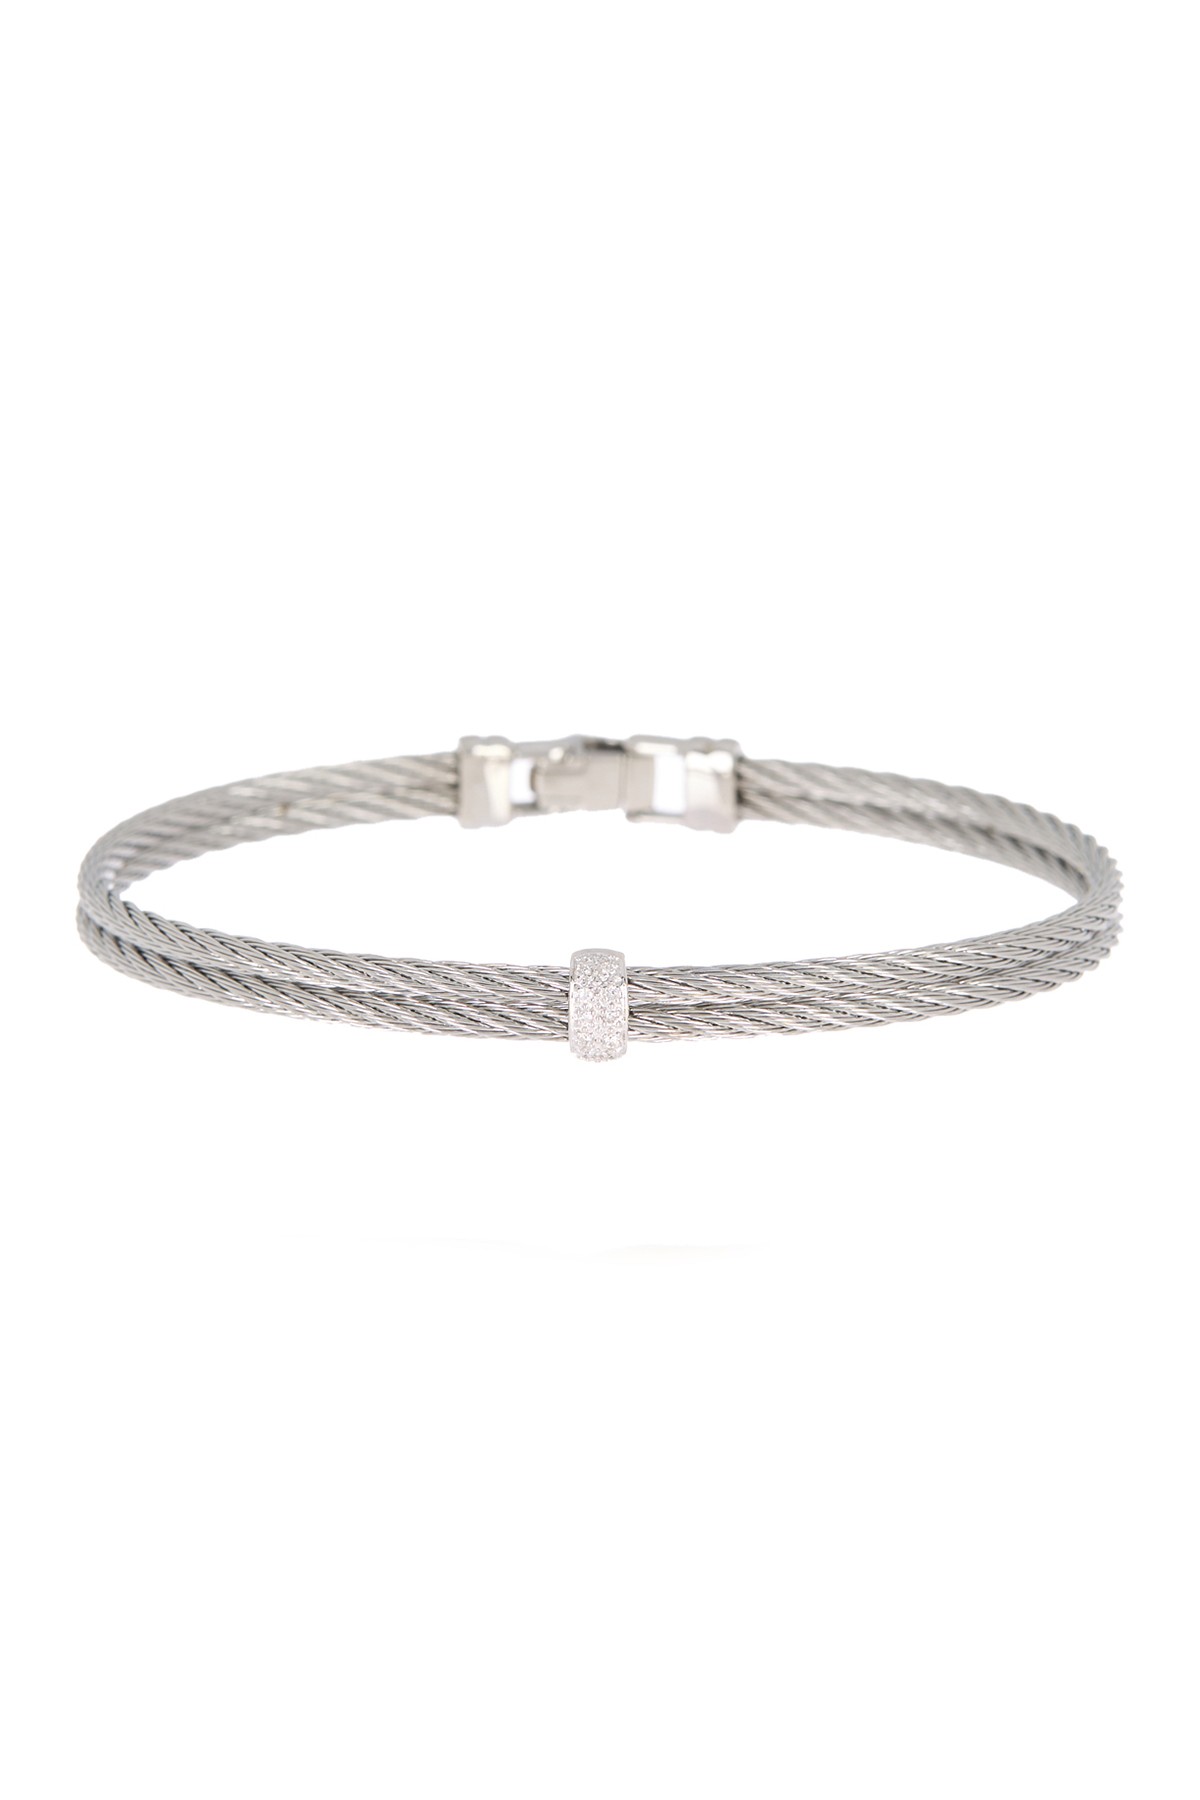 18K White Gold Stainless Steel Cable Cascade Chain Bracelet ALOR